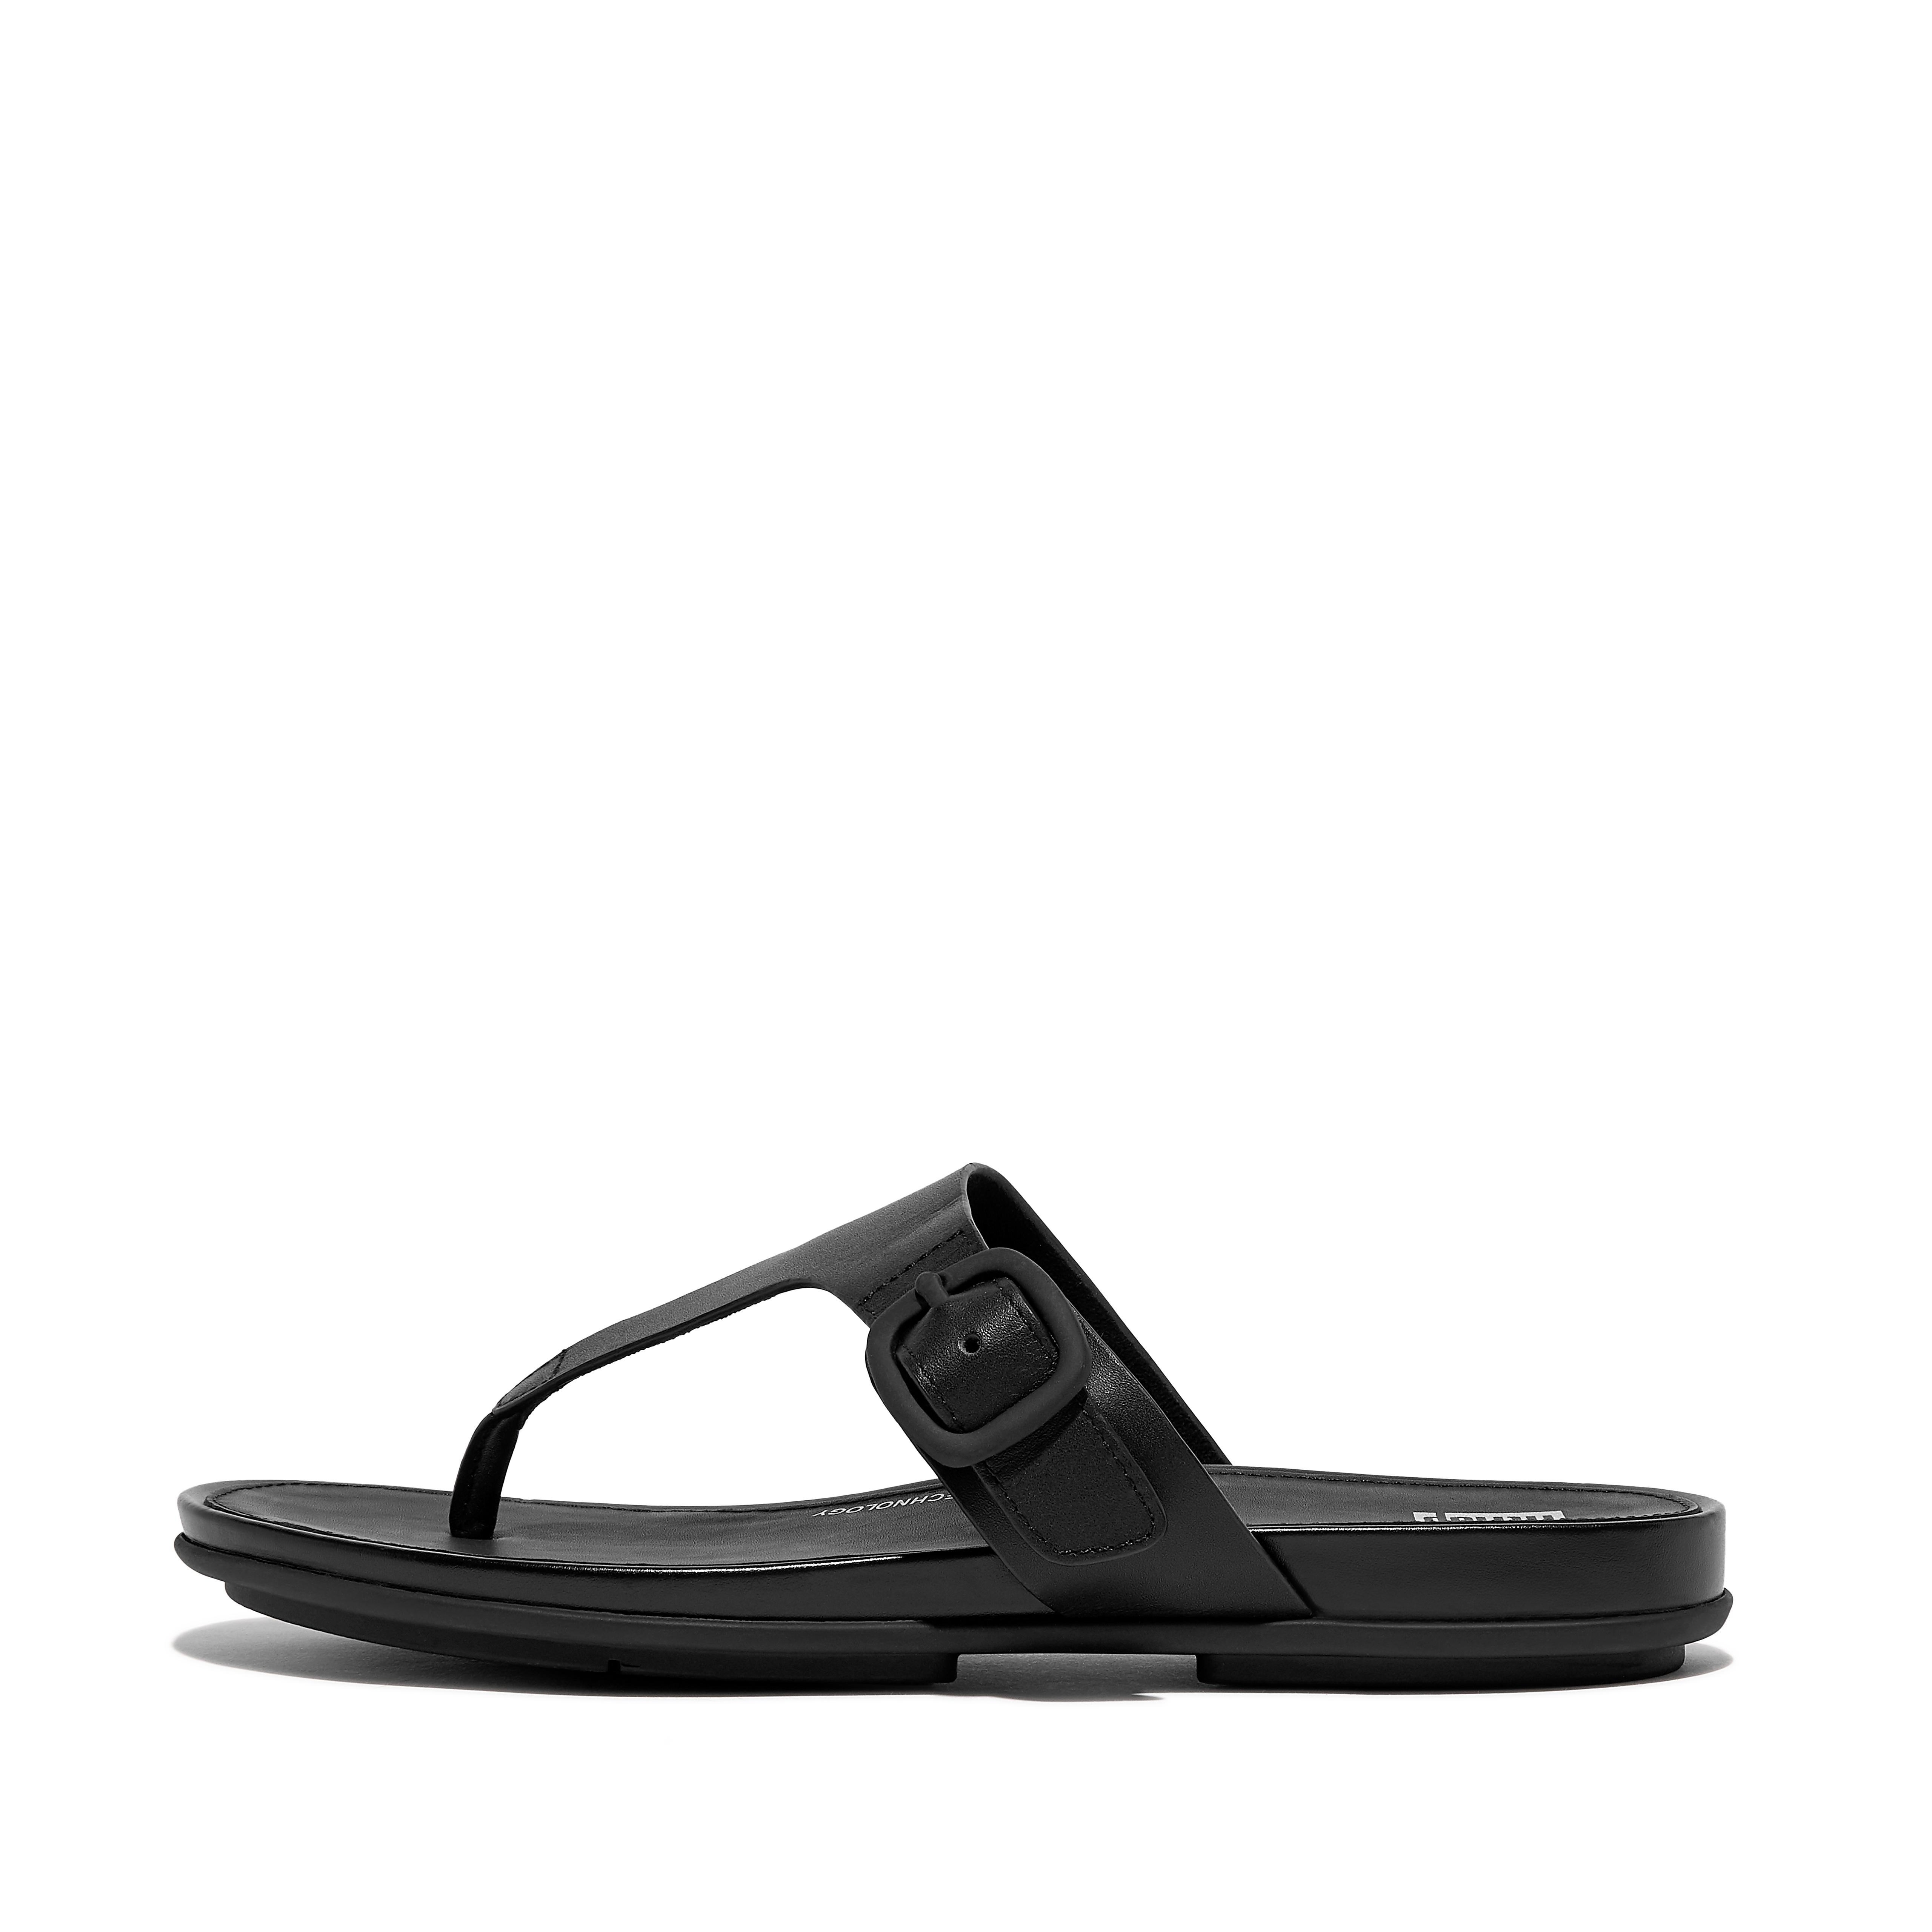 Women's Gracie Leather Toe-Post Sandals | FitFlop US